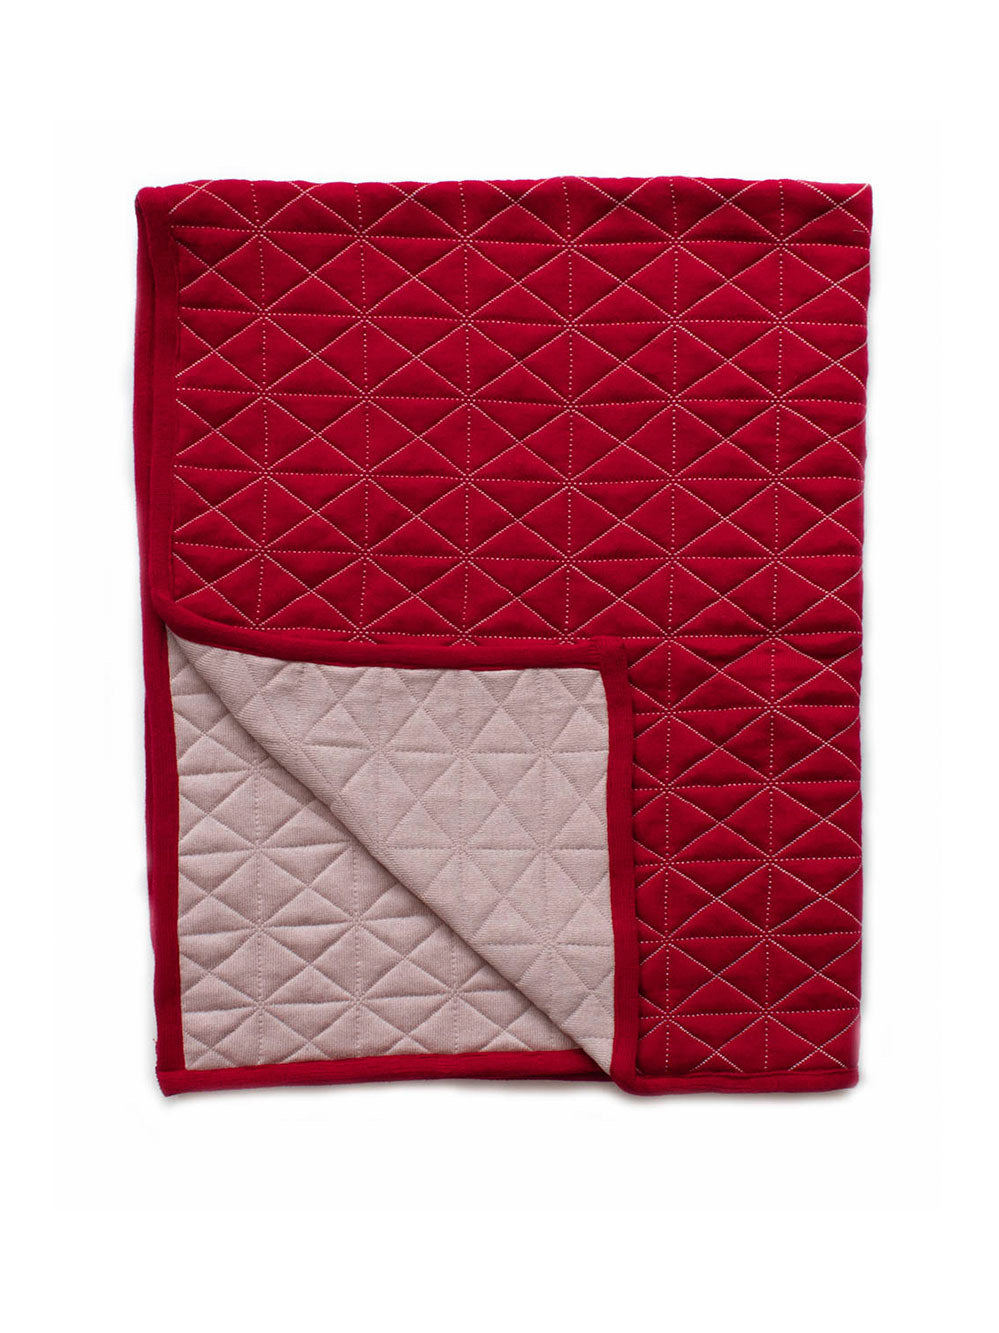 Poppy - Reversible quilted Blanket